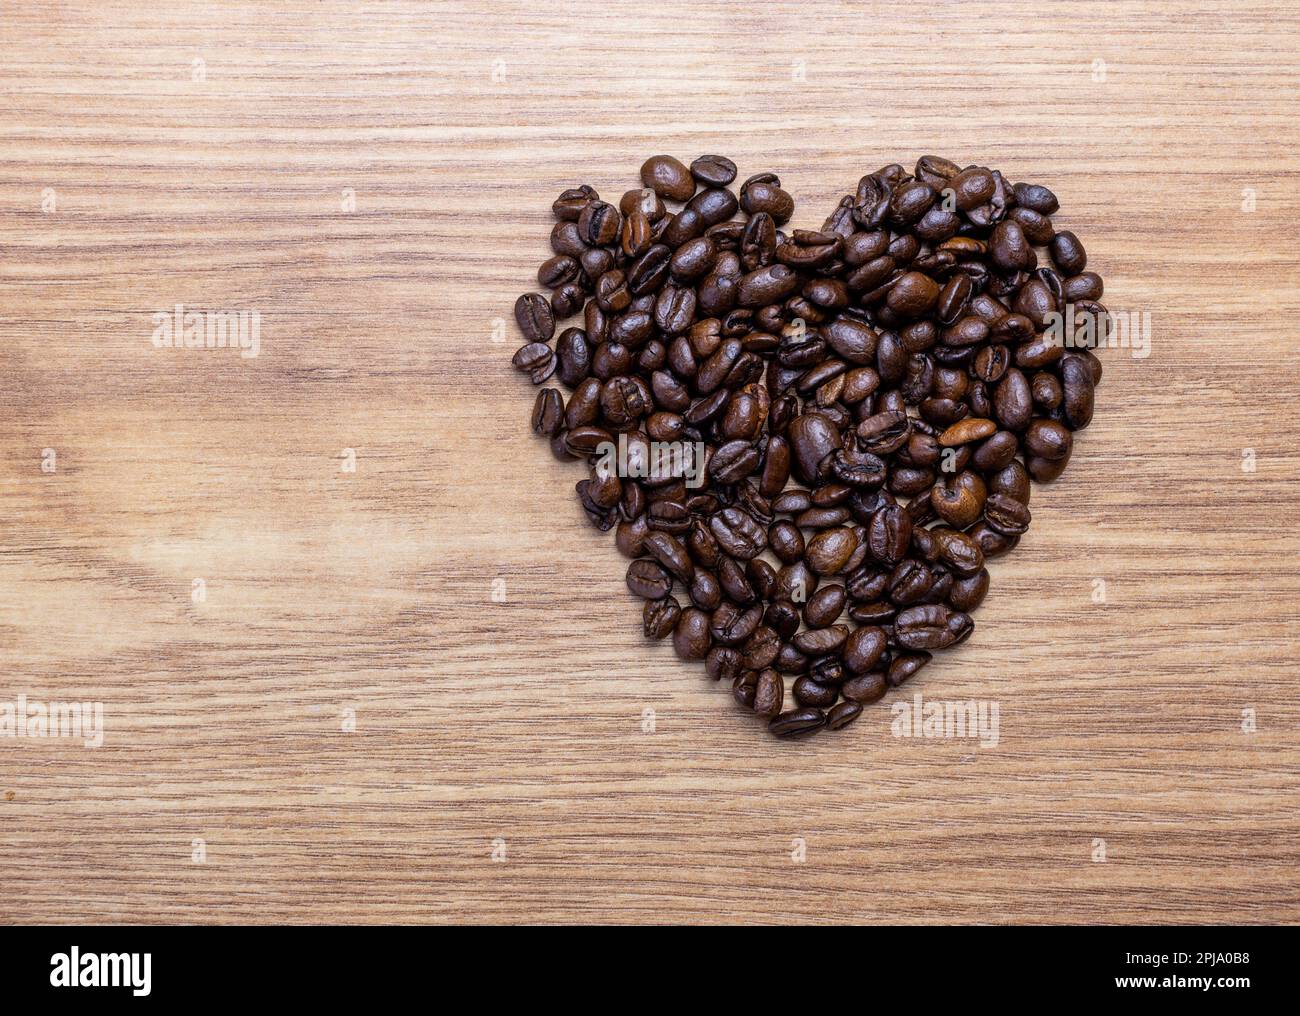 Concept of love or loving coffee. Heart shape made from coffee beans on a wooden board. Stock Photo